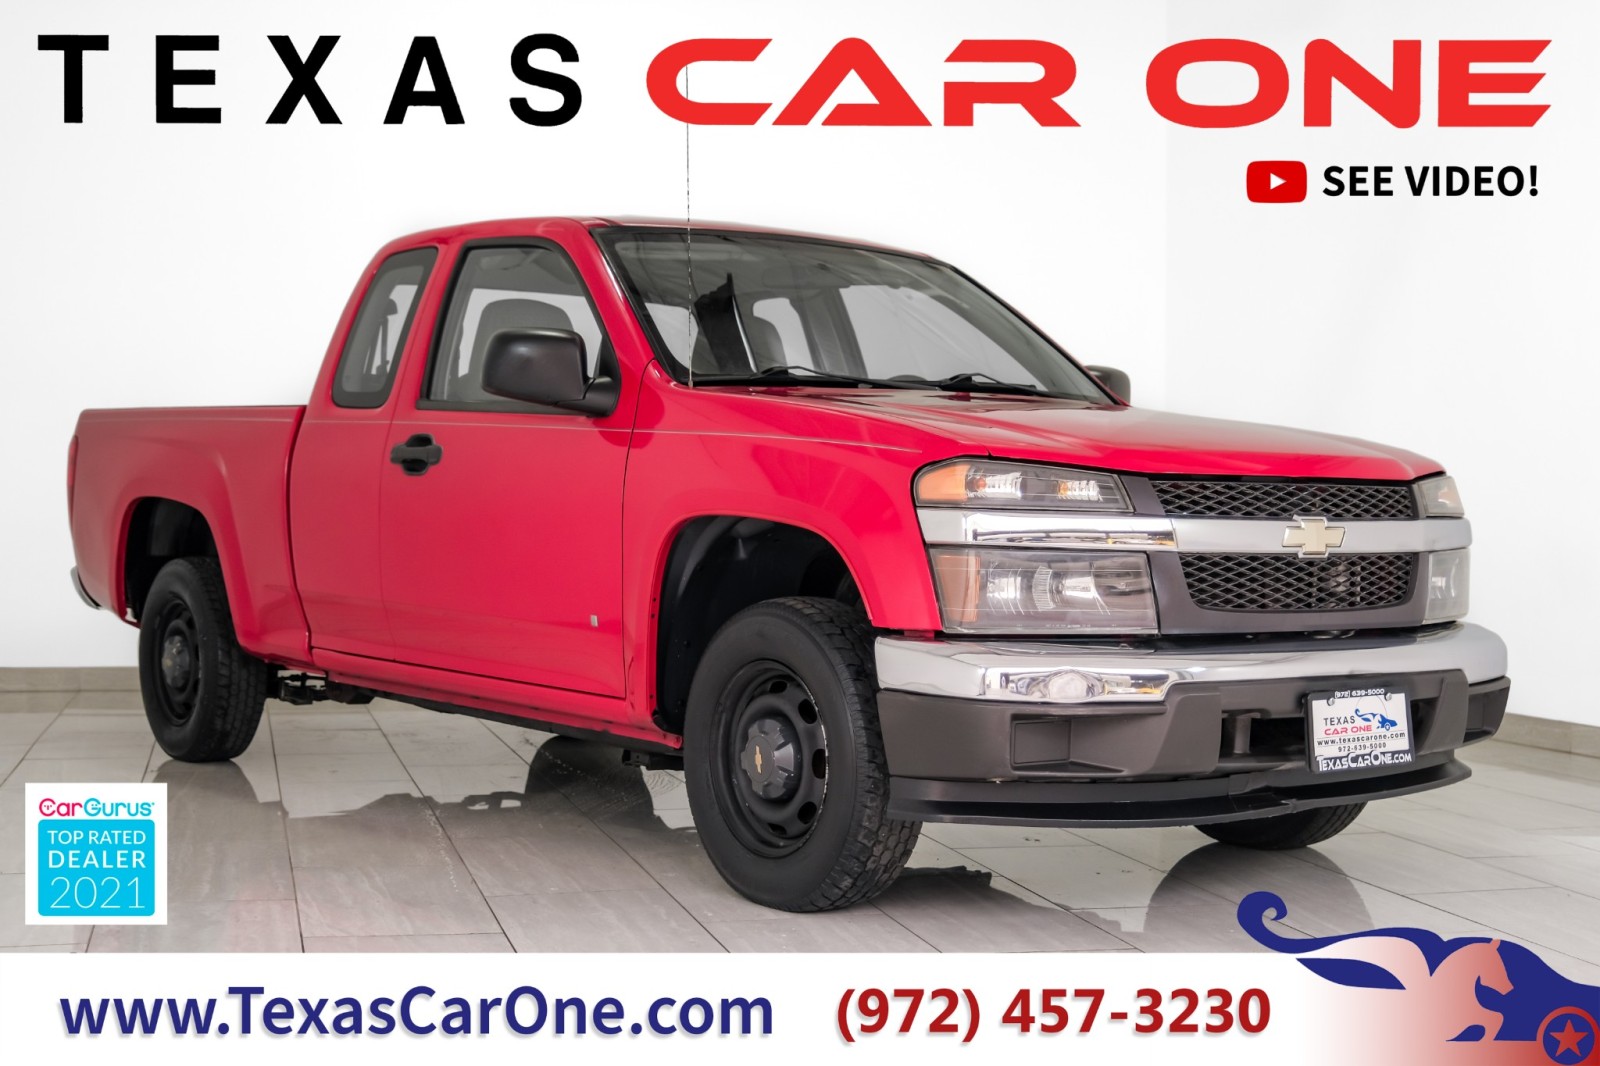 2006 Chevrolet Colorado LS EXTENDED CAB AUTOMATIC CRUISE CONTROL BED LINER 1